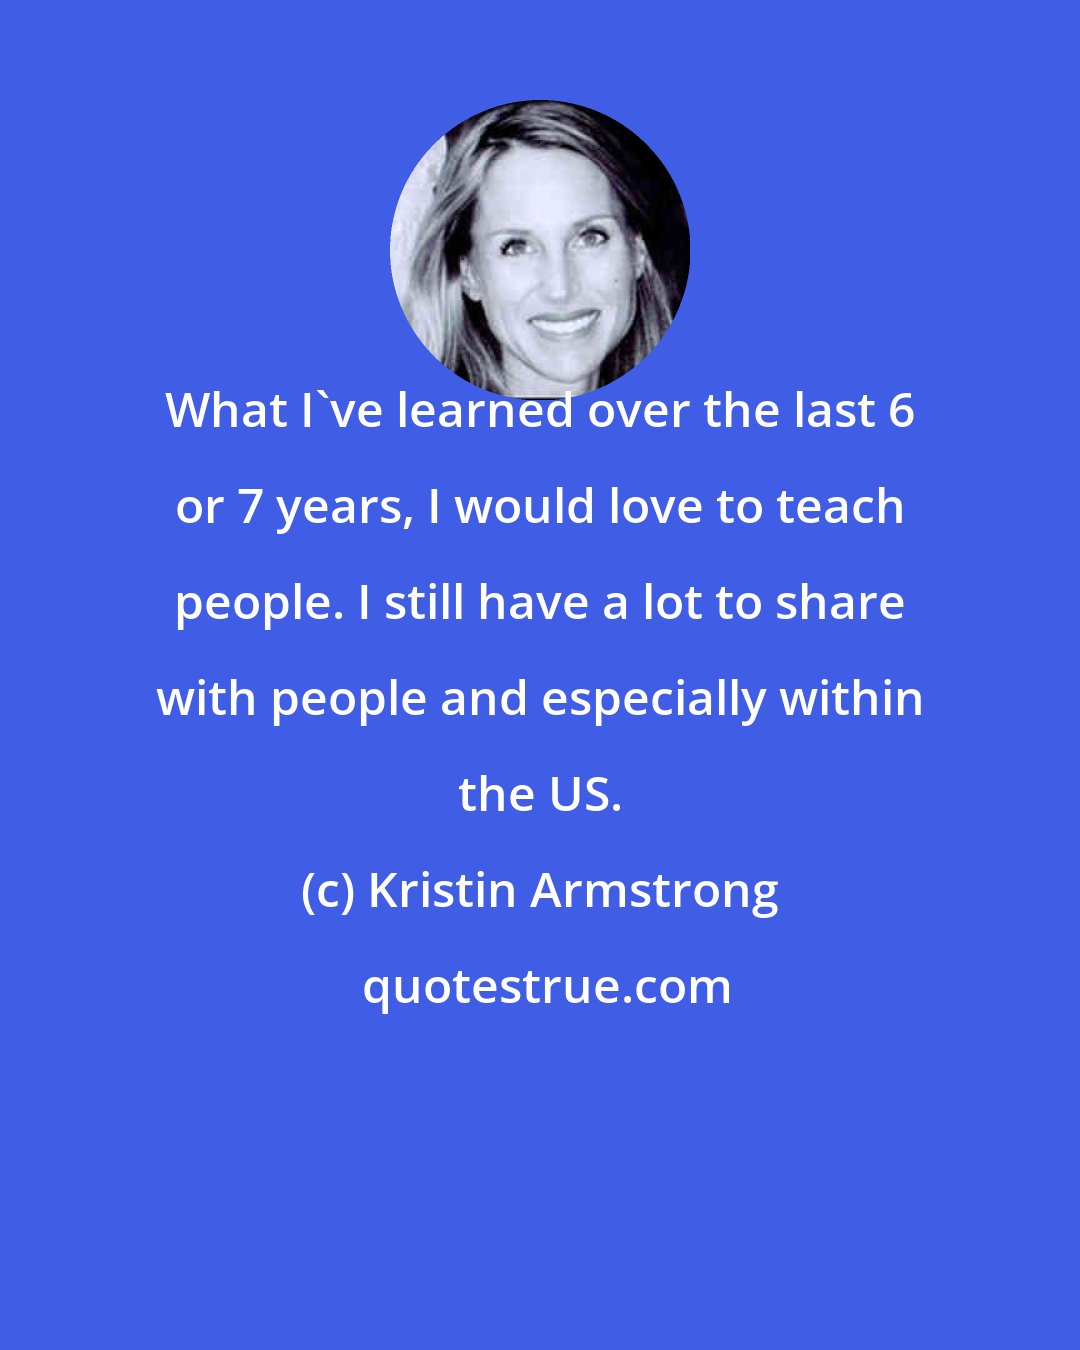 Kristin Armstrong: What I've learned over the last 6 or 7 years, I would love to teach people. I still have a lot to share with people and especially within the US.